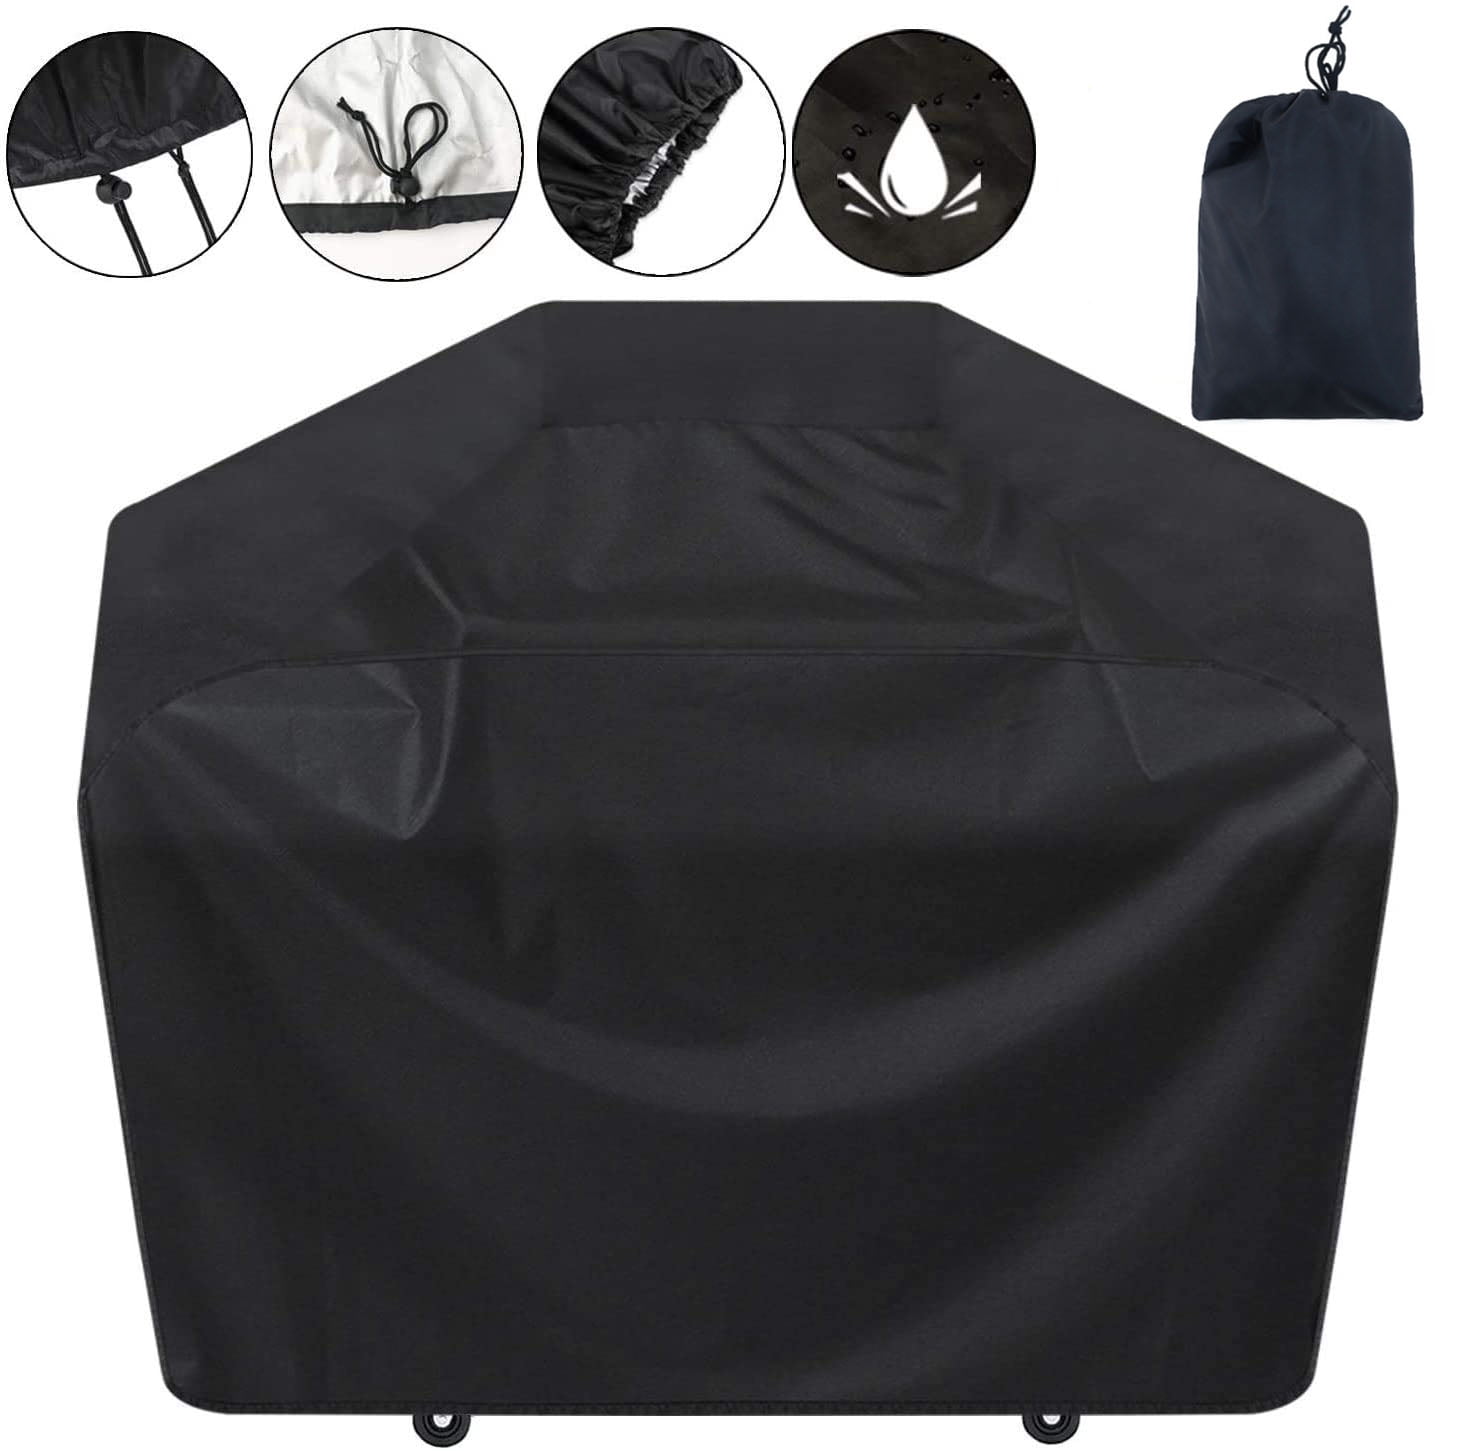 BBQ Gas Grill Cover 58" Barbecue Waterproof Outdoor Heavy Duty UV & Dust Proof 